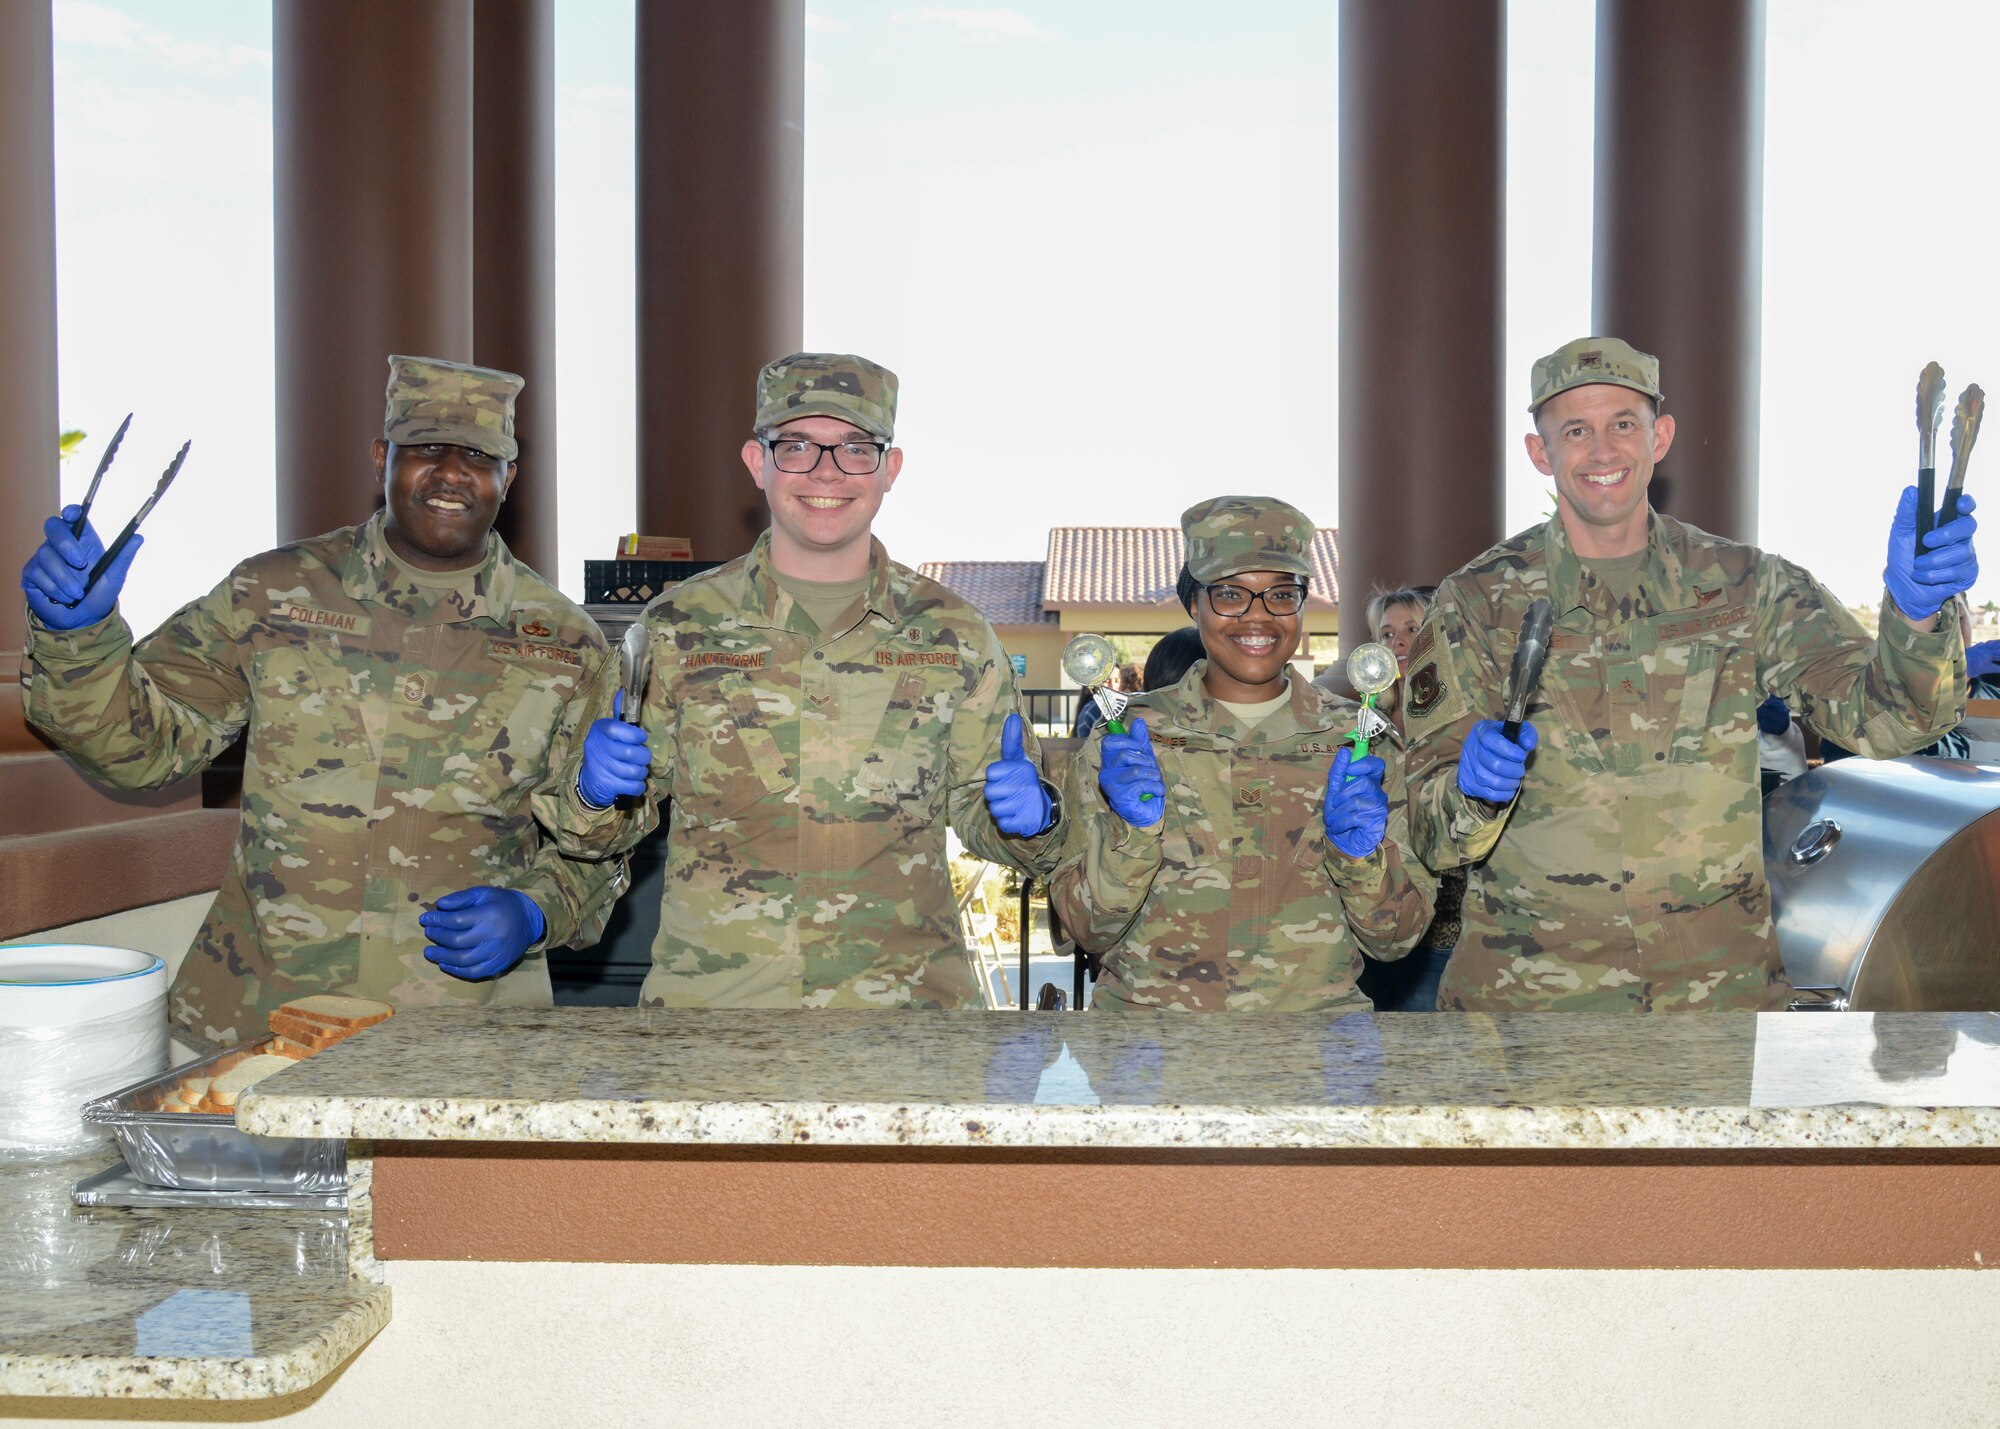 Chief Master Sgt. James Coleman, 412th Test Wing acting command chief, Airman 1st Class Cameron Hawthorne, 412th Aerospace Medicine Squadron, Staff Sgt. Akina Jones, 412th AMDS, and Brig. Gen. E. John Teichert, 412th TW commander, pose for a photo during a Strong Family Program event at the Mojave Sky Community Center at Edwards Air Force Base, California, March 18. (U.S. Air Force photo by Giancarlo Casem)